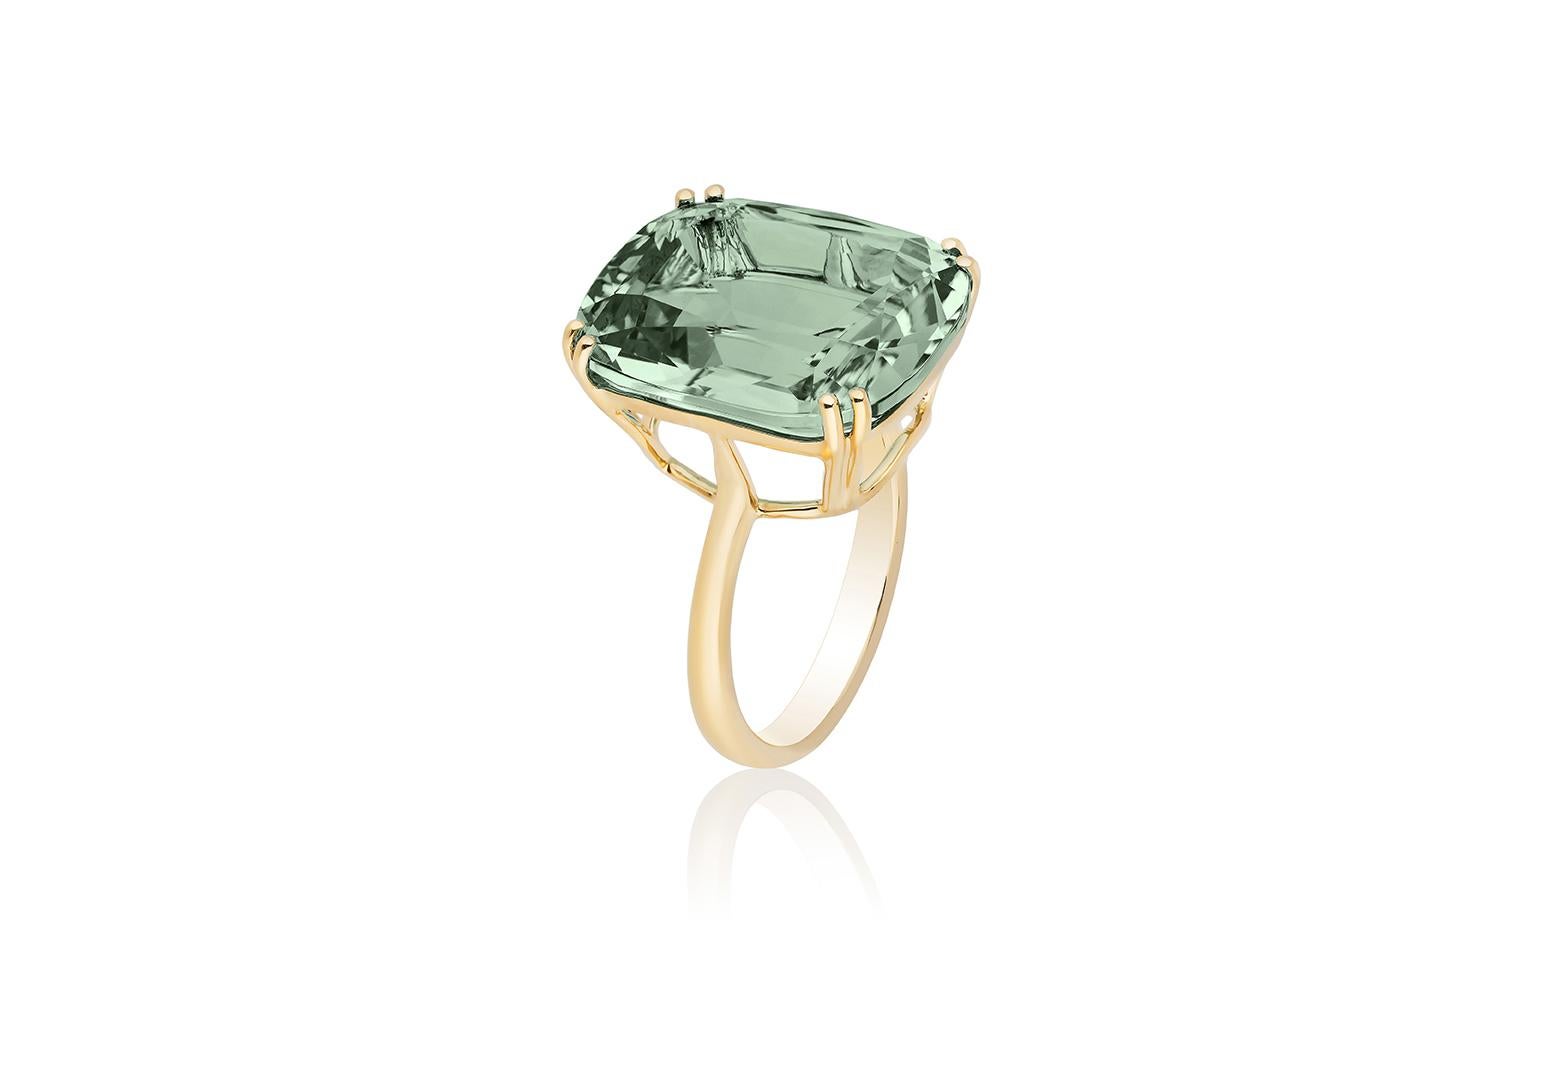 This beautiful Prasiolite Cushion Ring with Tube Shank is from our 'Gossip' Collection. Like any good piece of gossip, it carries a hint of shock value. If you want to make a statement, this is the perfect ring to do it.

* Gemstone: 100% Earth